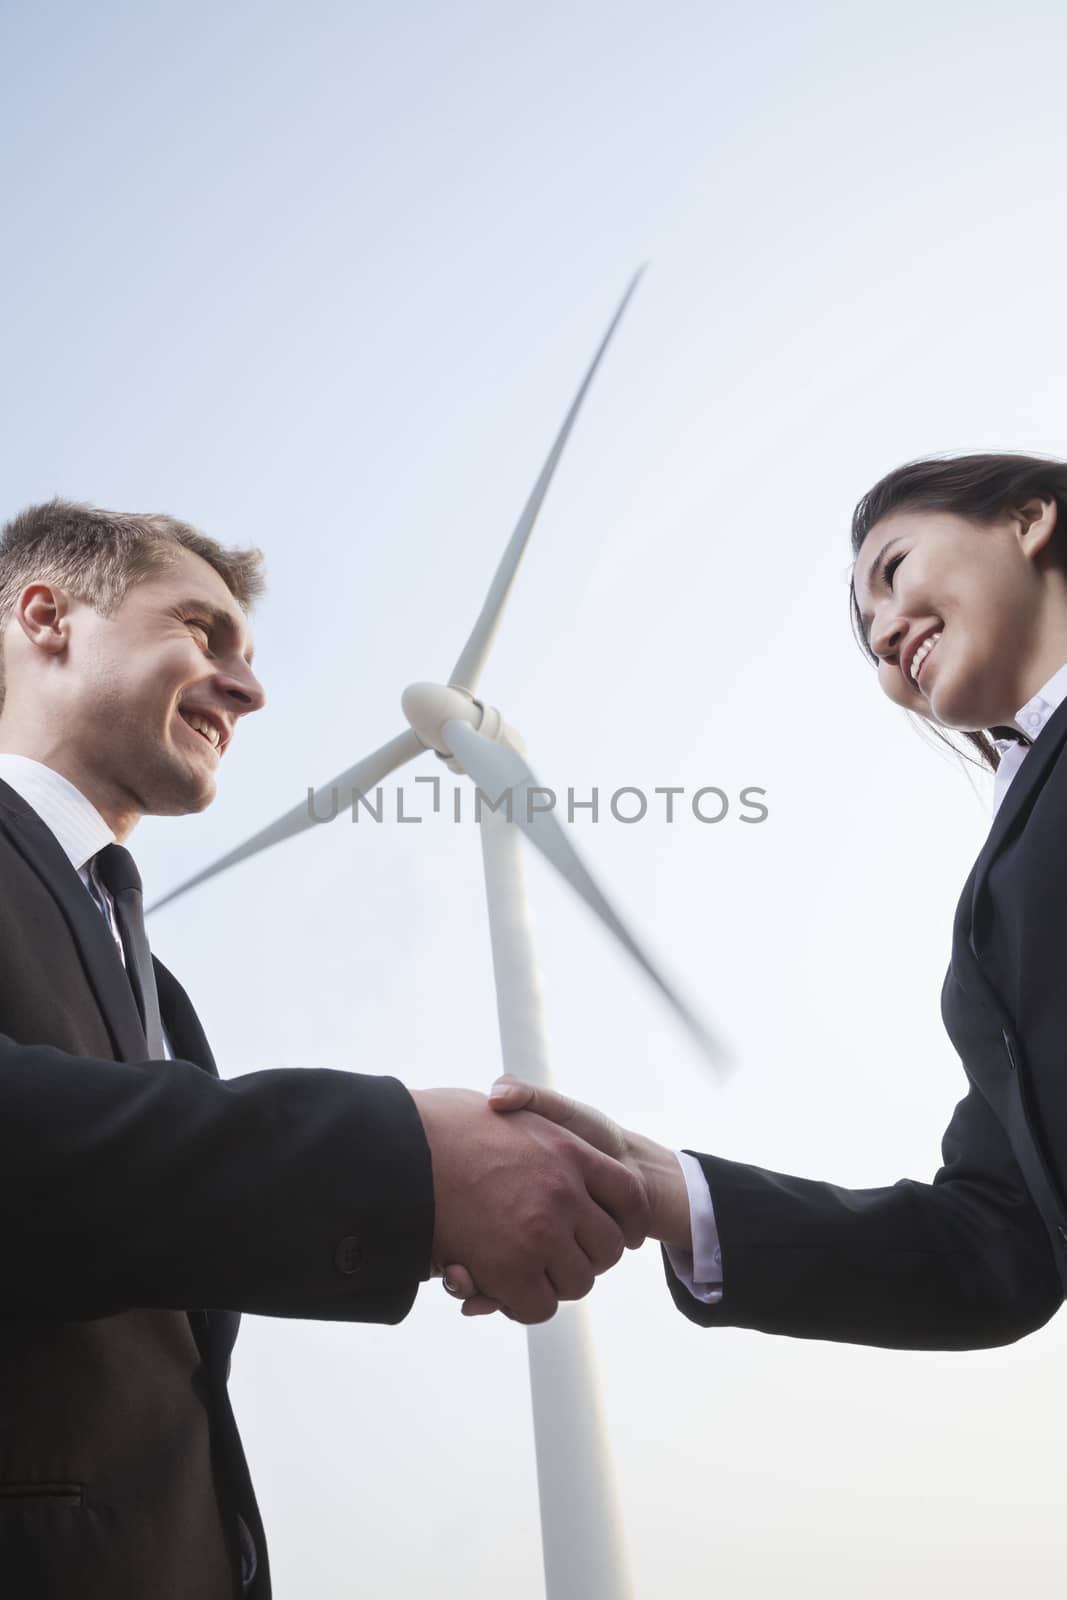 Two smiling young business people shaking hands in front of a wind turbine